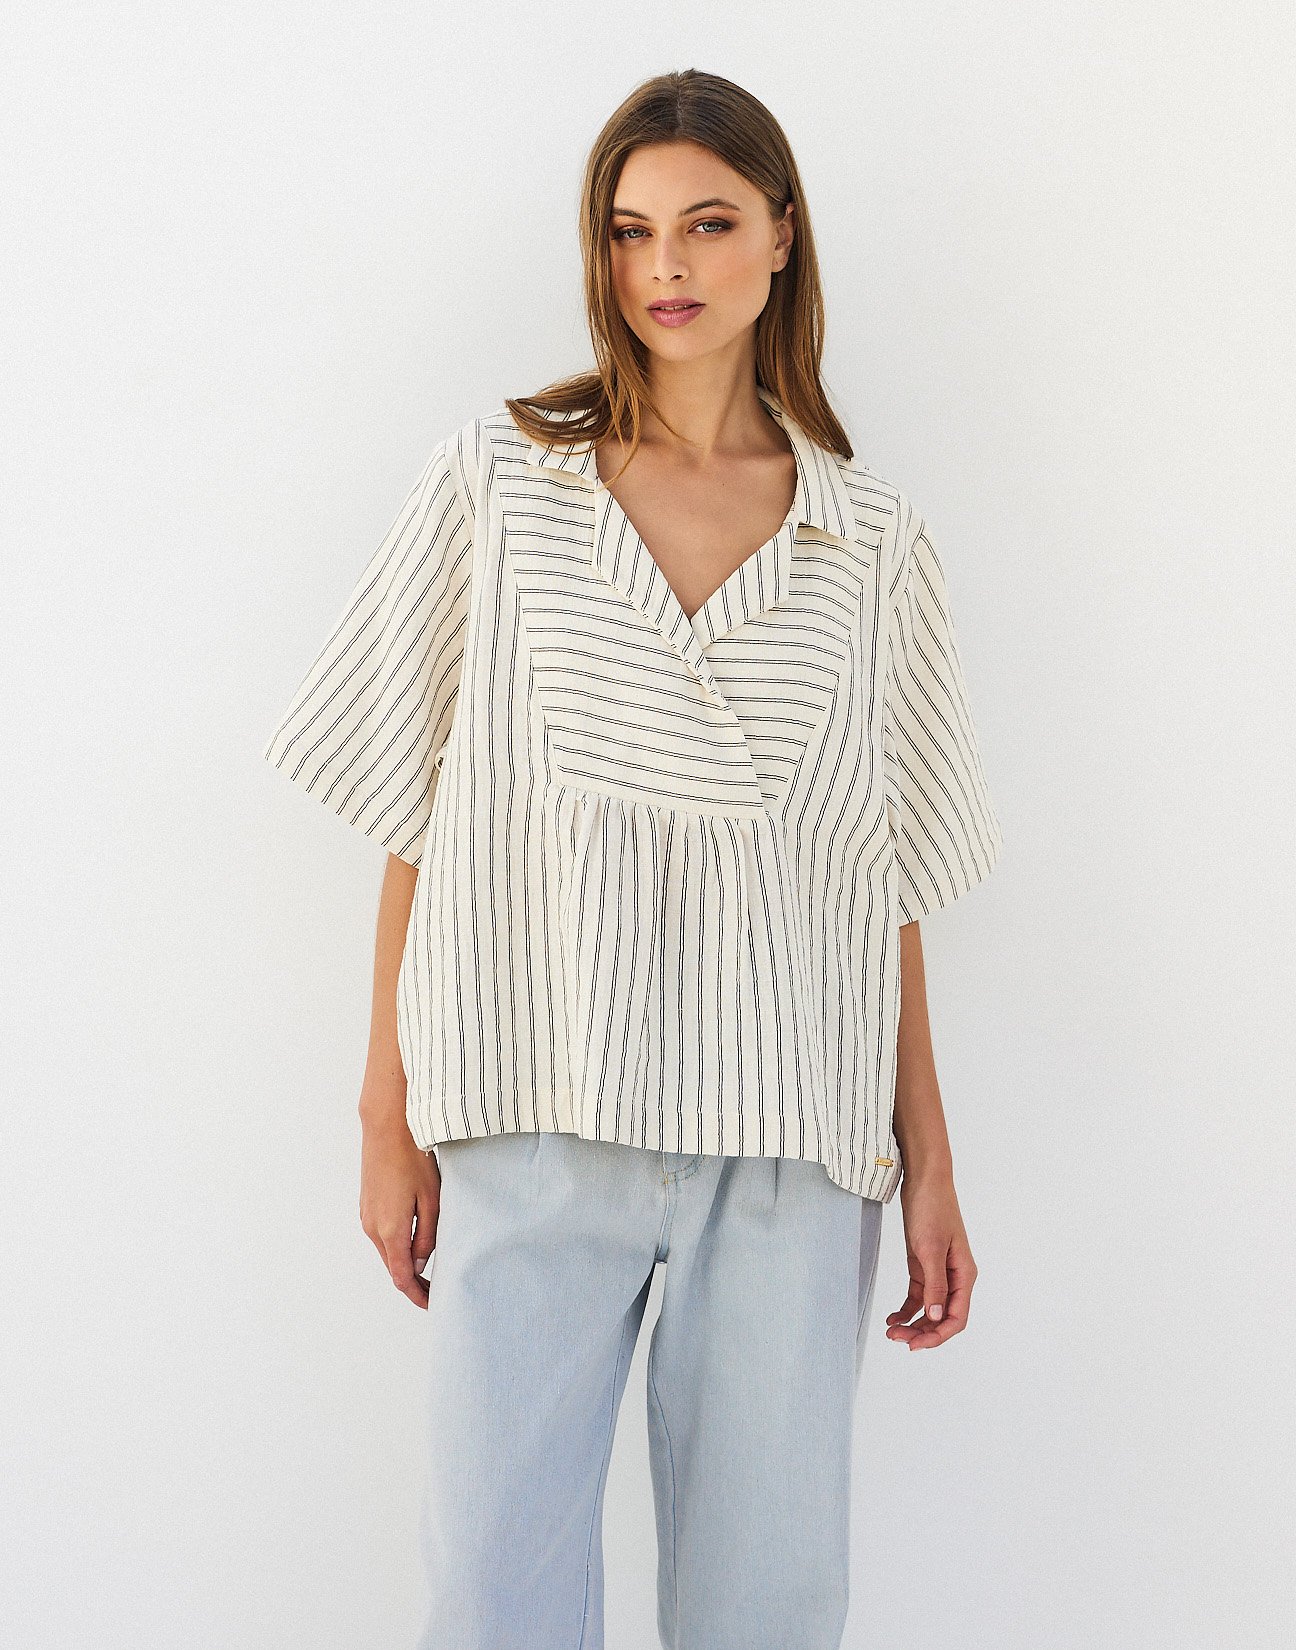 Striped blouse with collar